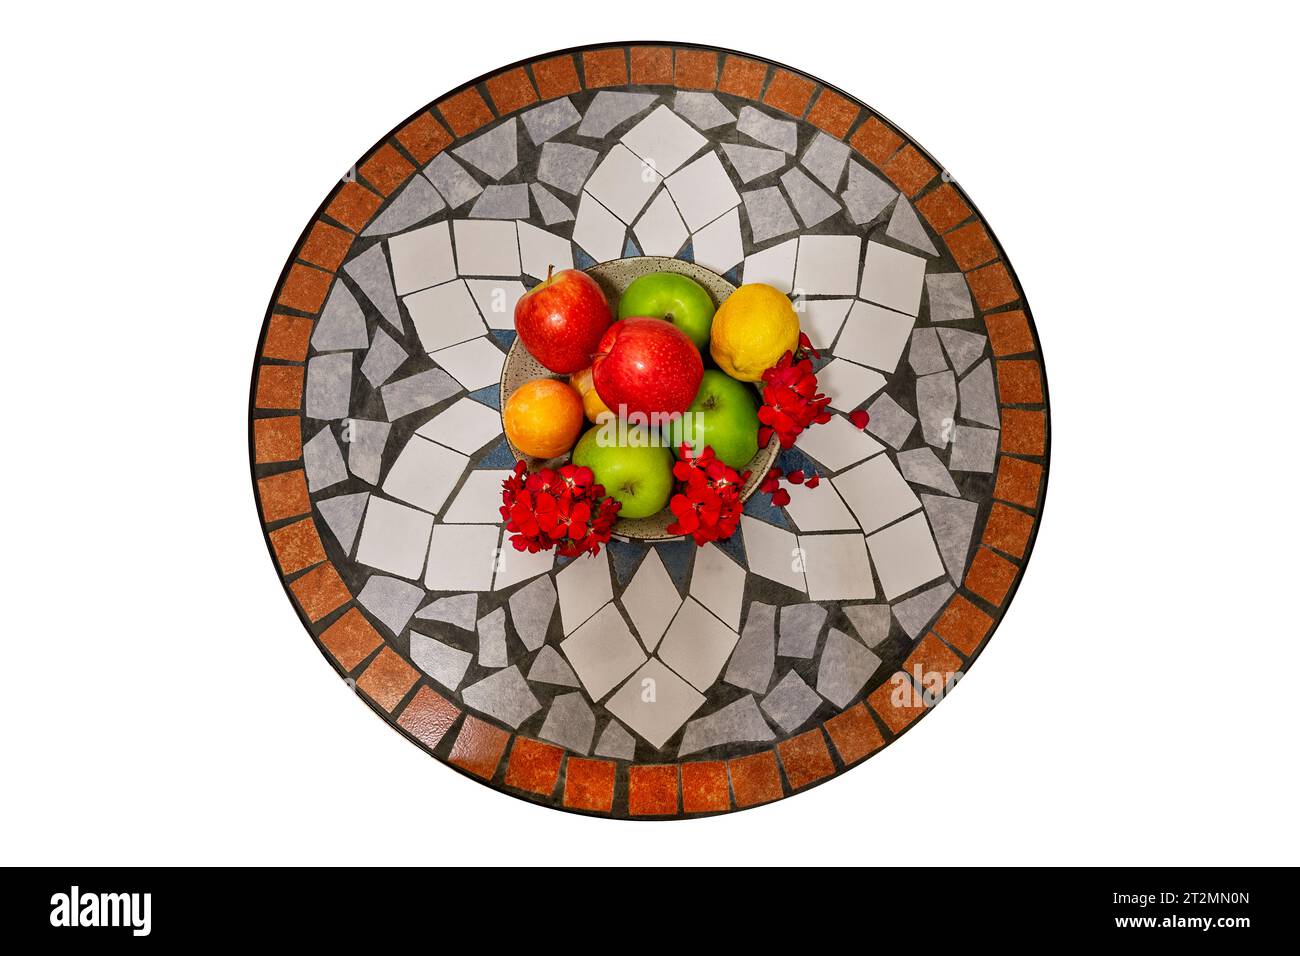 Bowl of fruit with red and green apples, lemons, and oranges on a mosaic tile table. Top view. Isolated on white background. Stock Photo